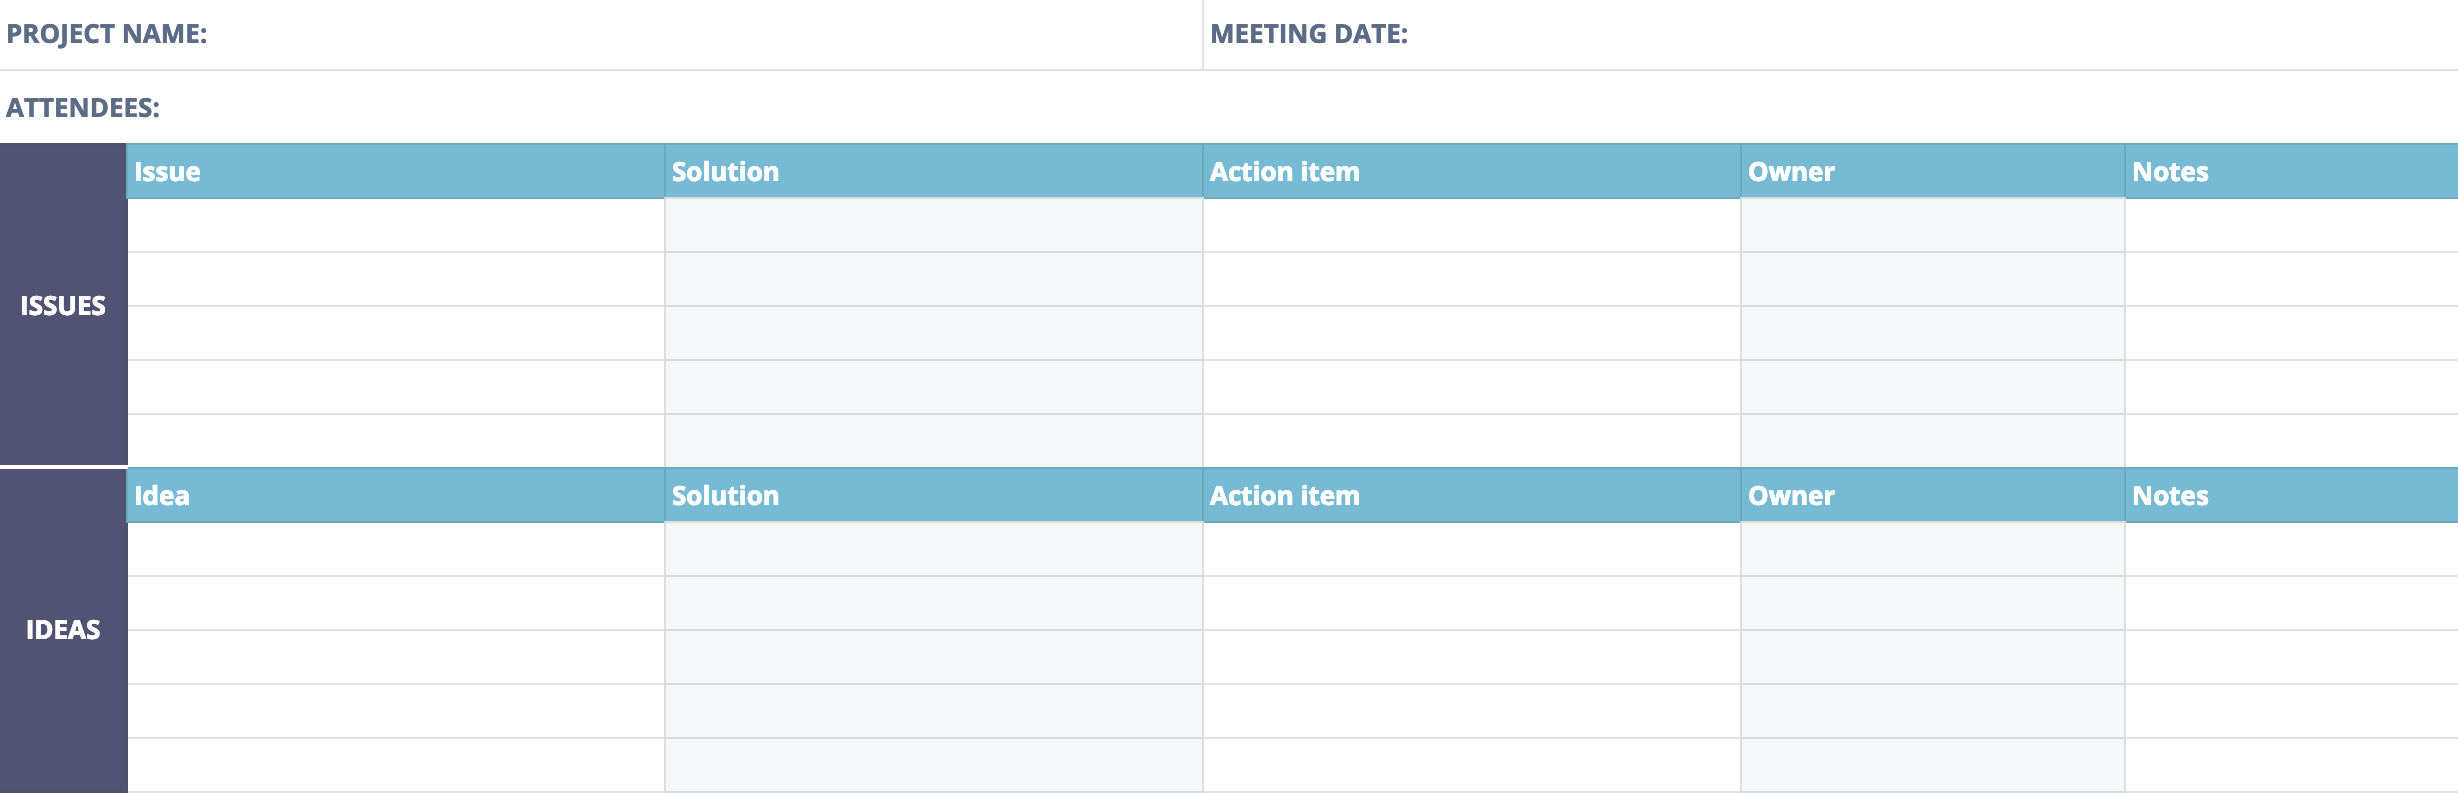 Post Mortem Meeting Template And Tips | Teamgantt Within Debriefing Report Template